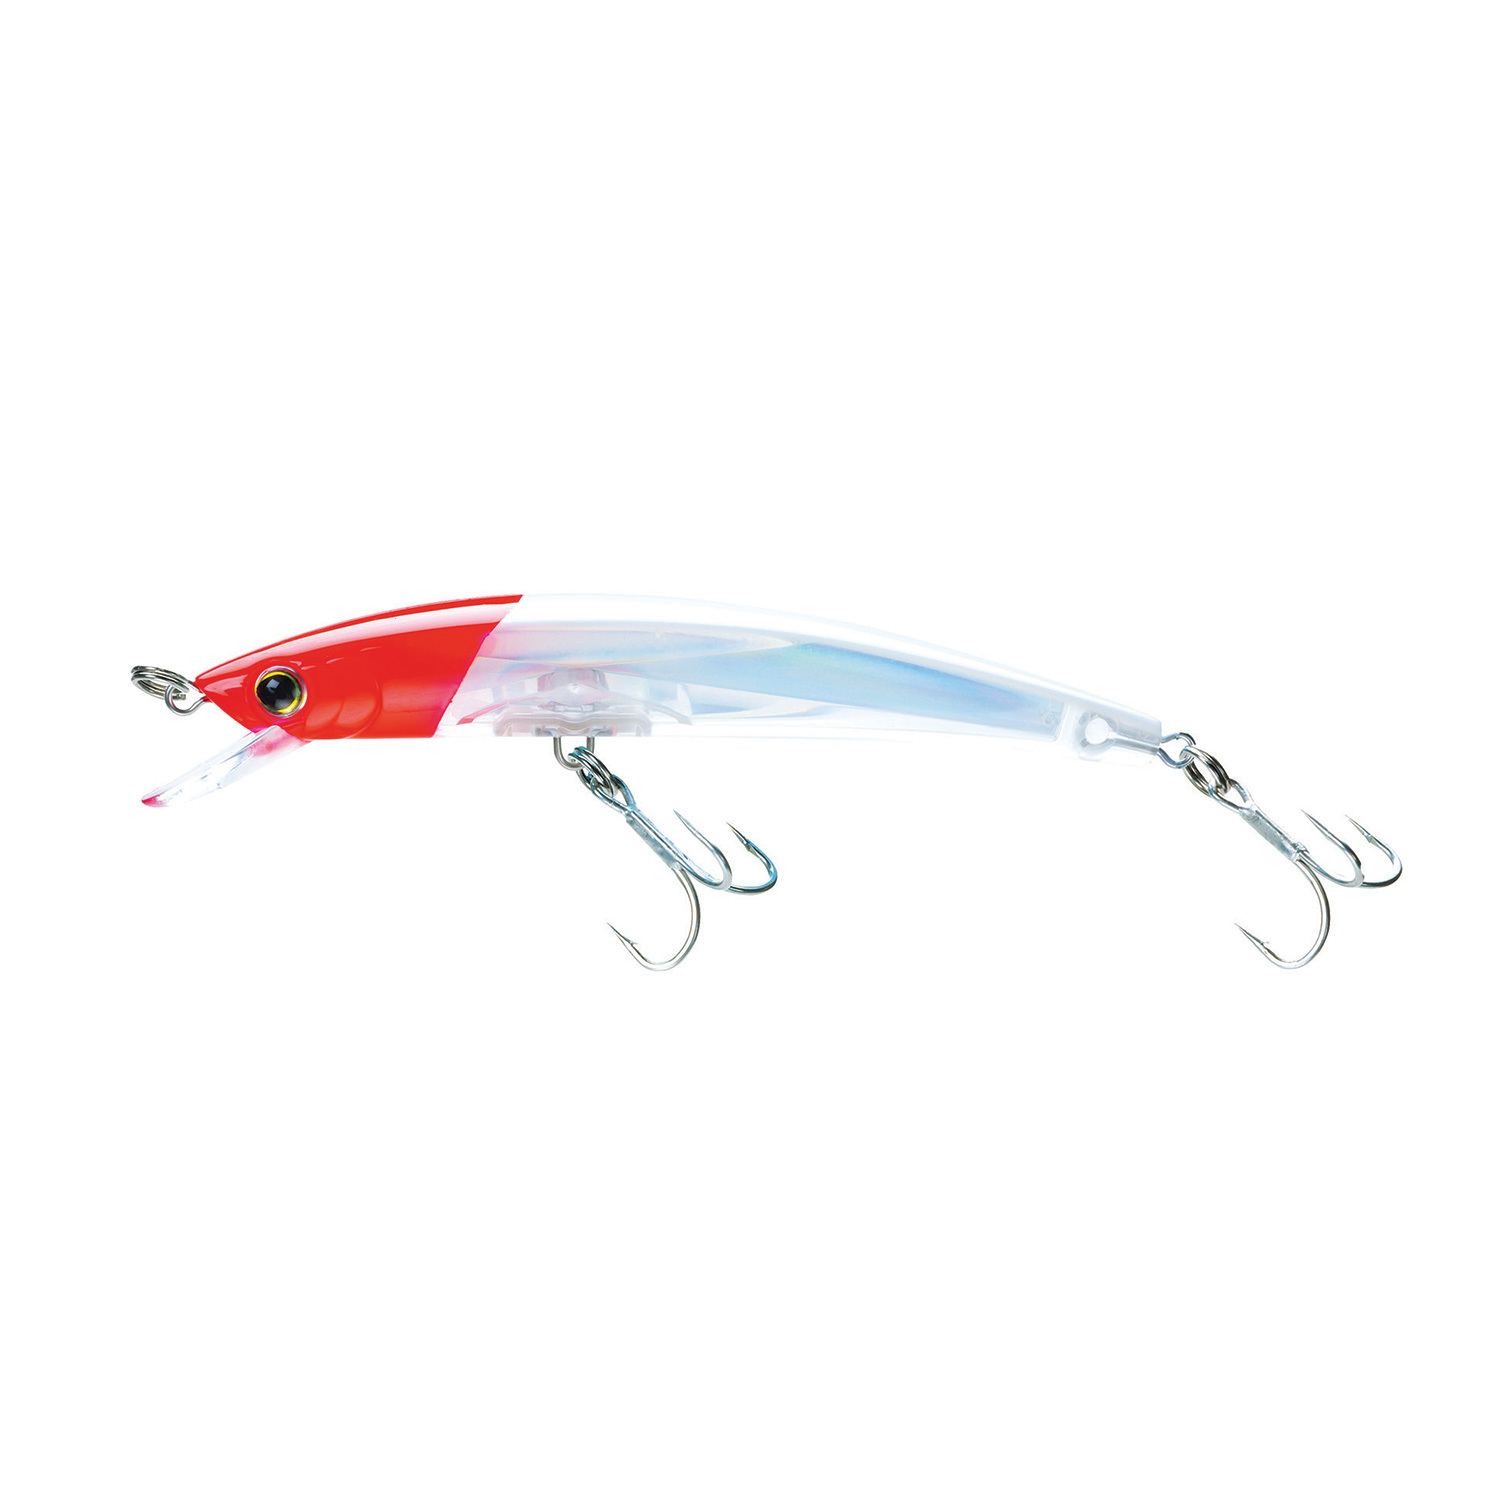 Crystal 3D Minnow™ Rattle Fishing Lure